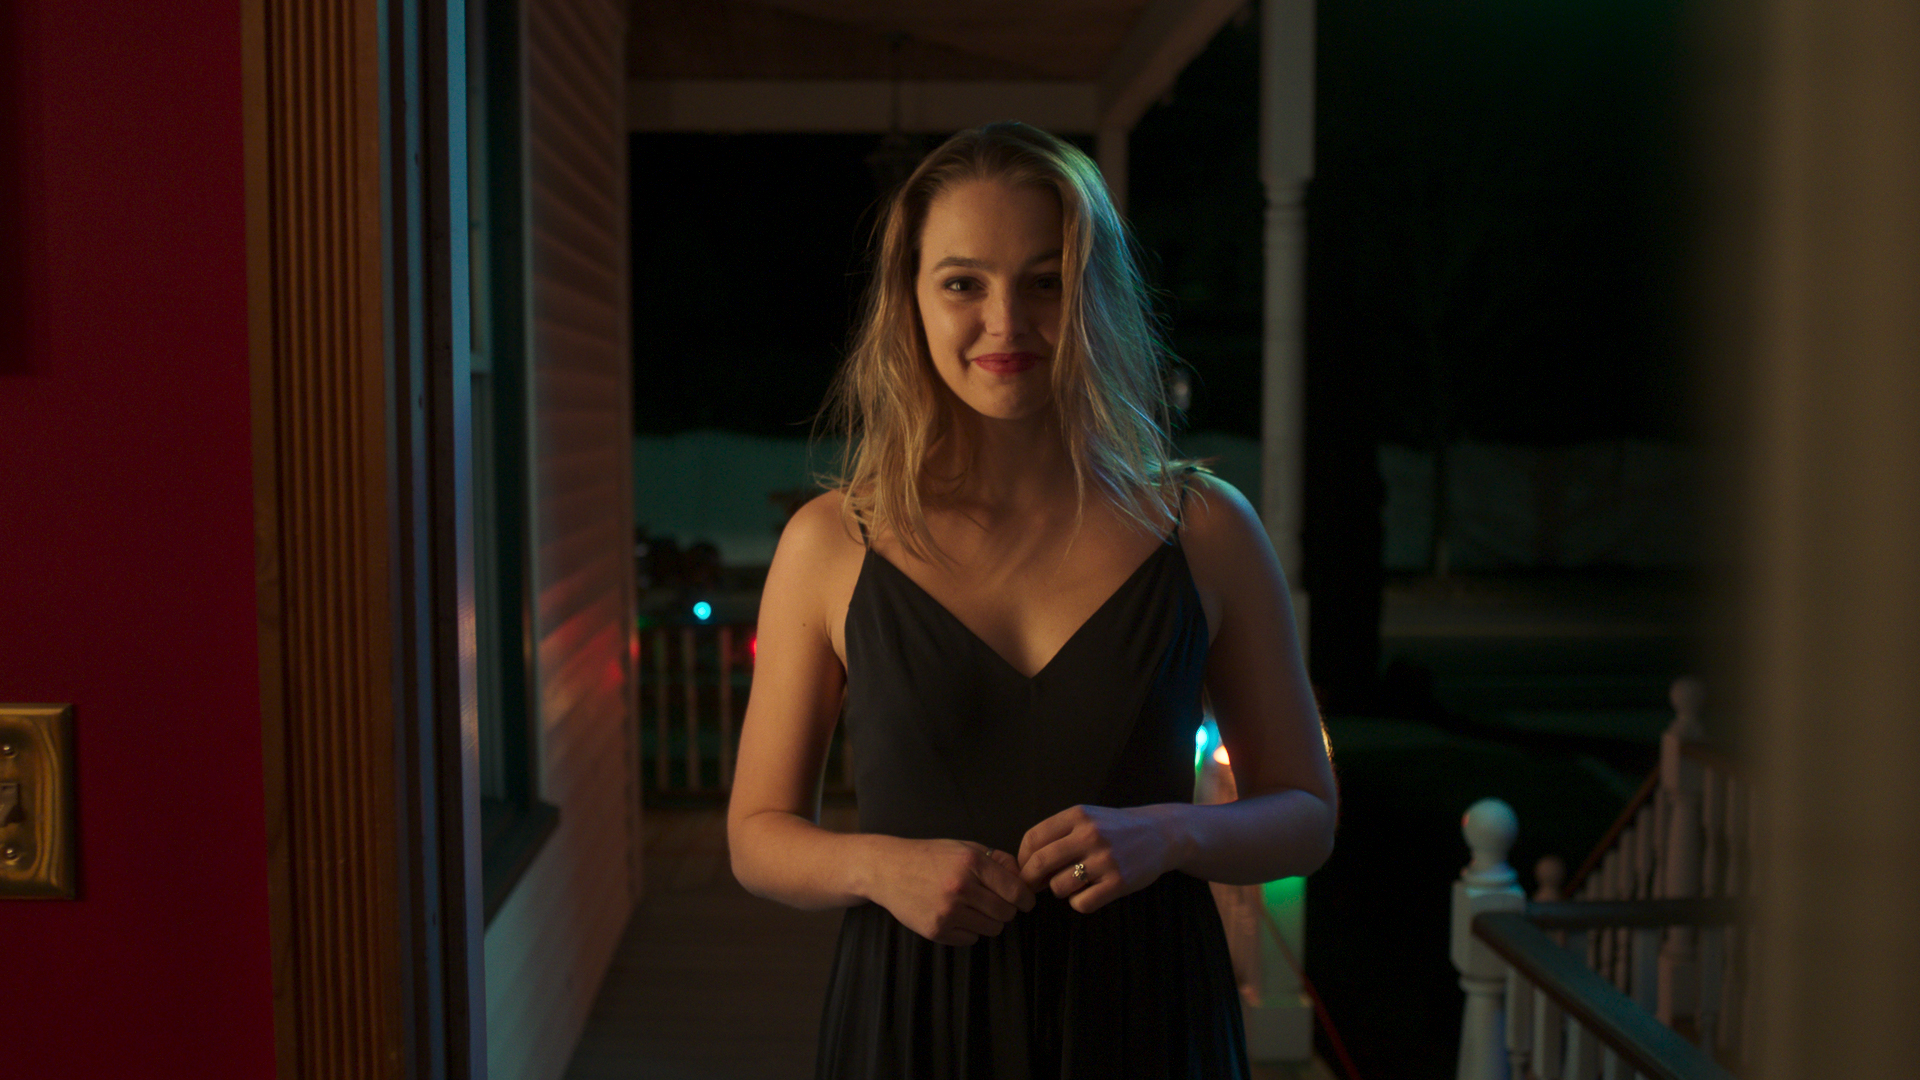 A still from The Gift.